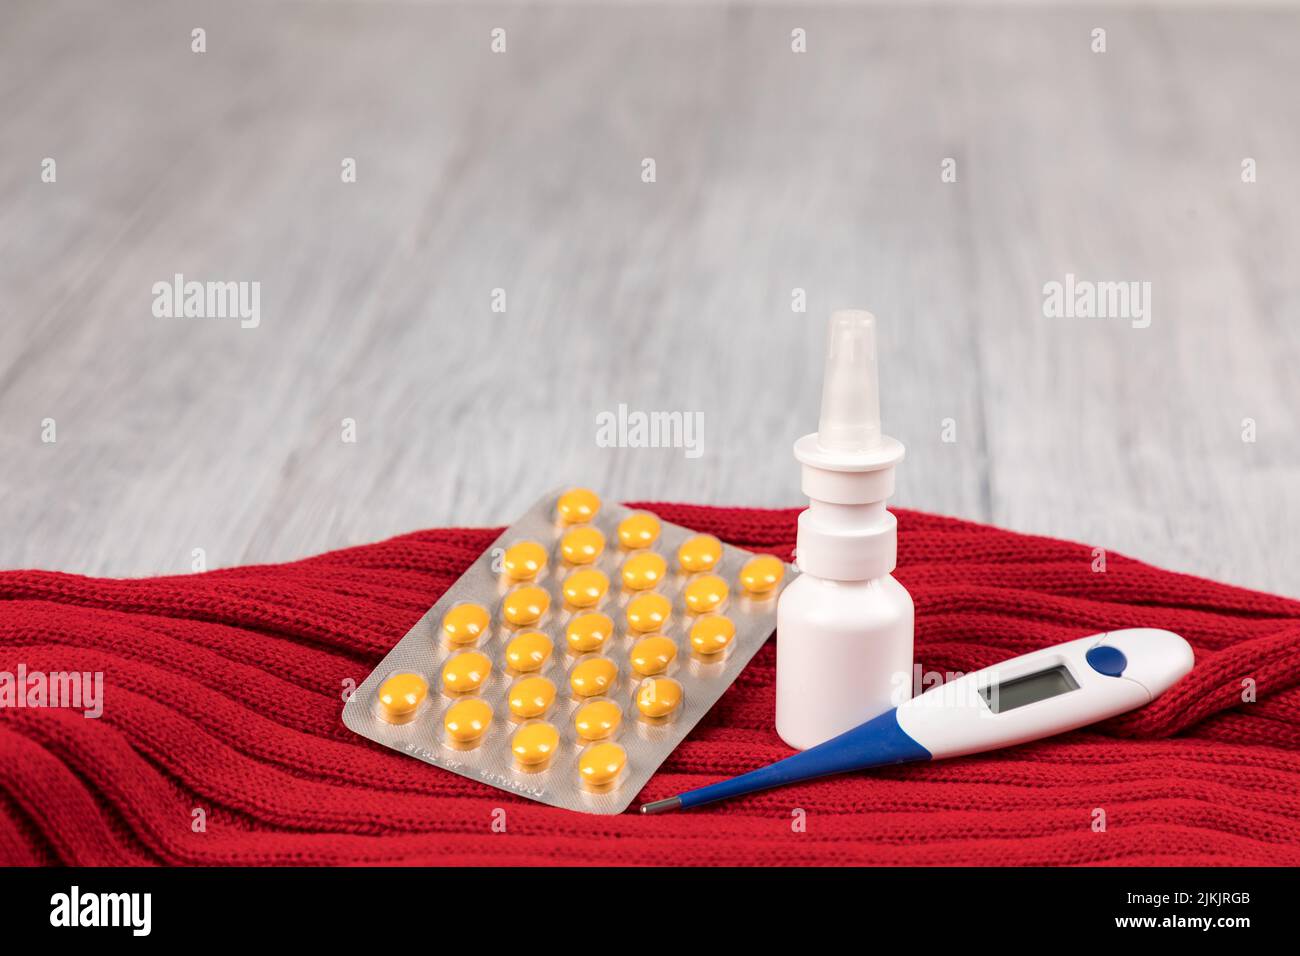 A closeup of a nasal spray, thermometer and tablets with a red scarf on a wooden surface Stock Photo